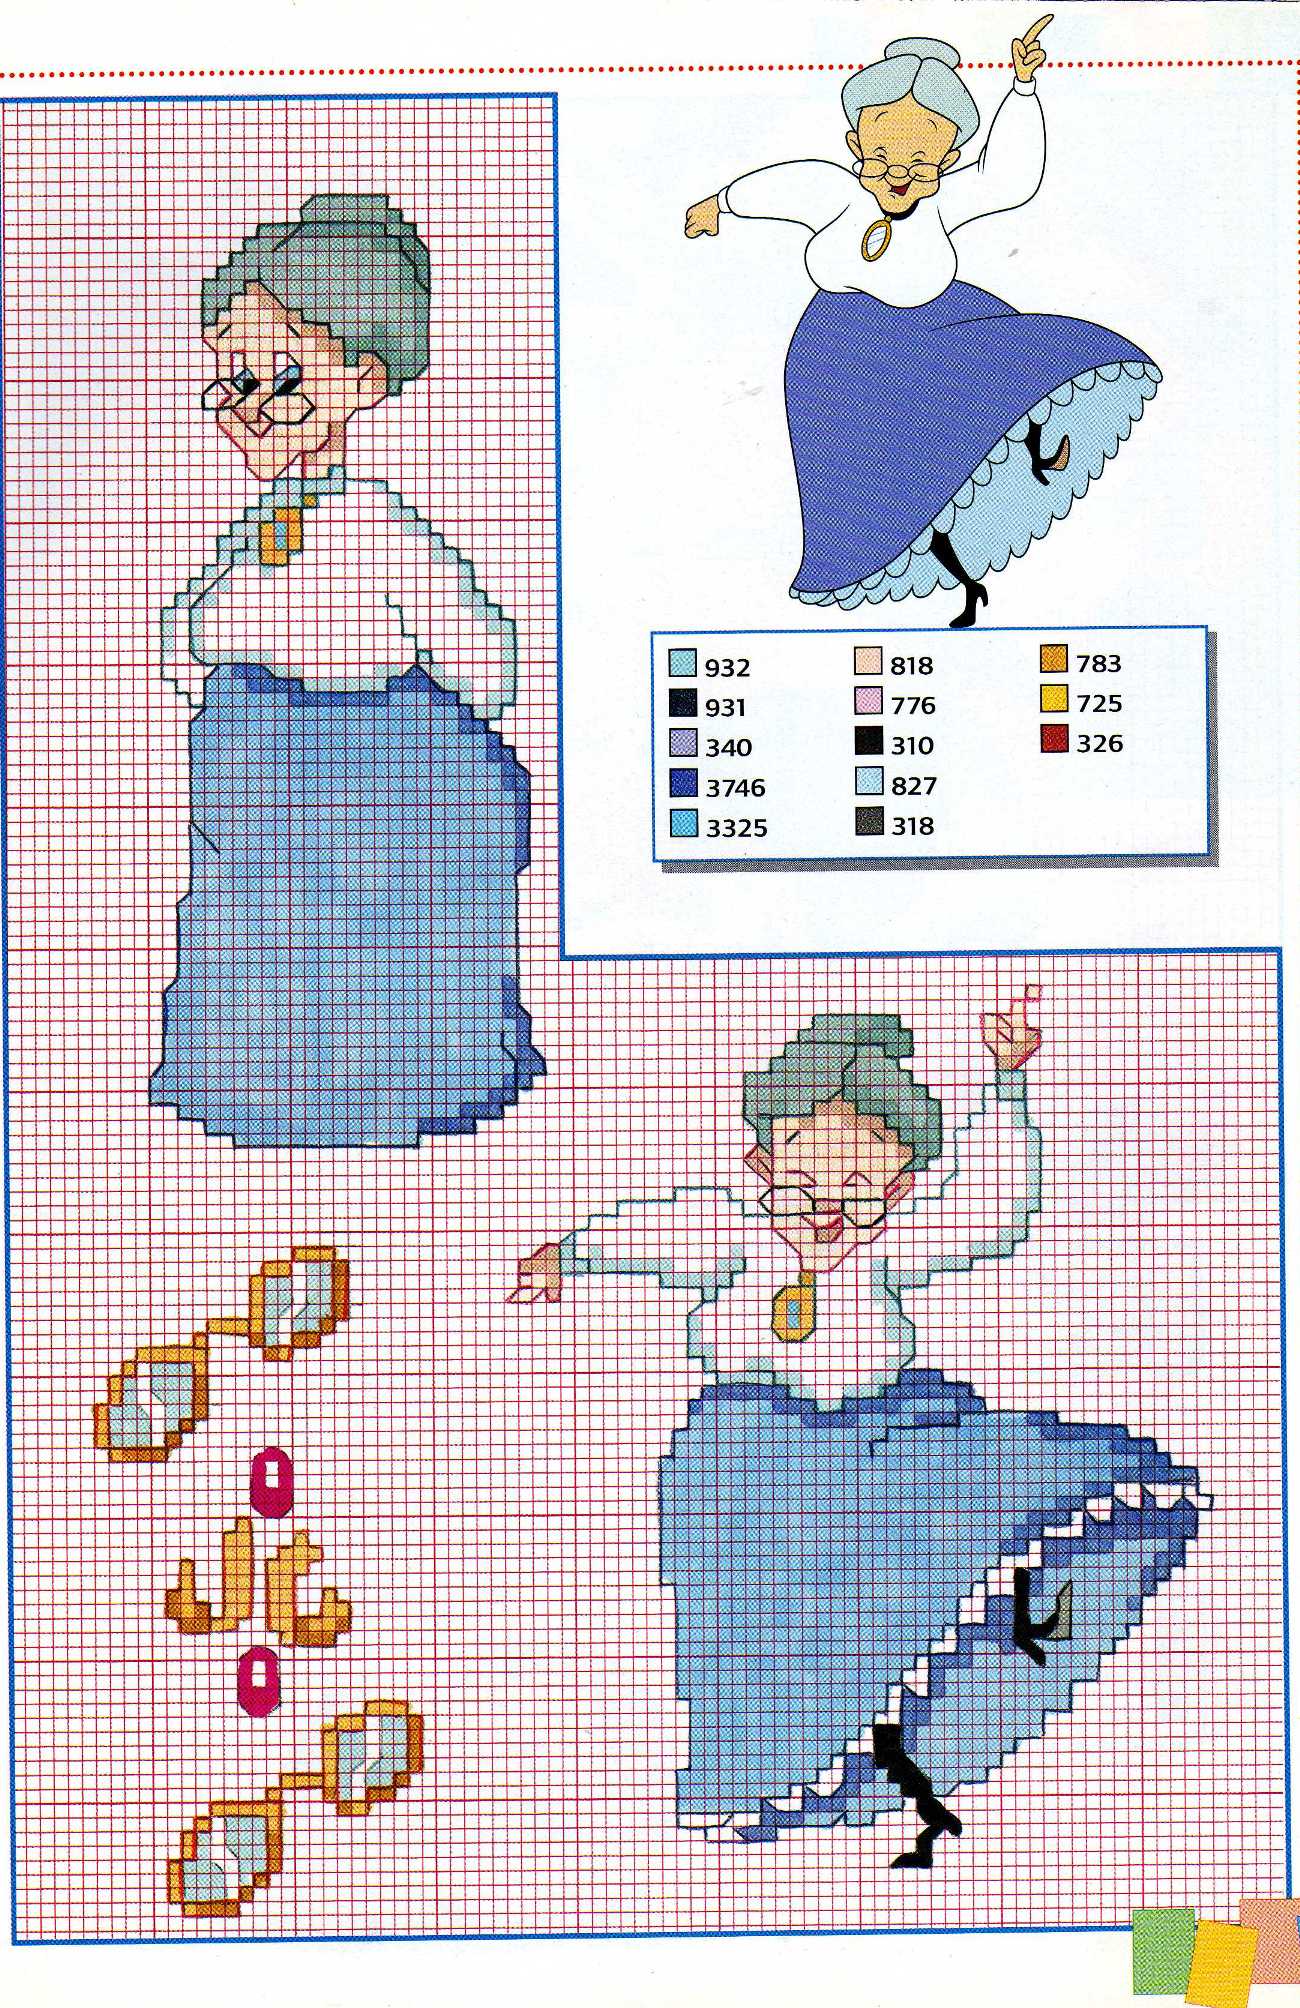 Granny Sylvester and Tweety cross stitch patterns